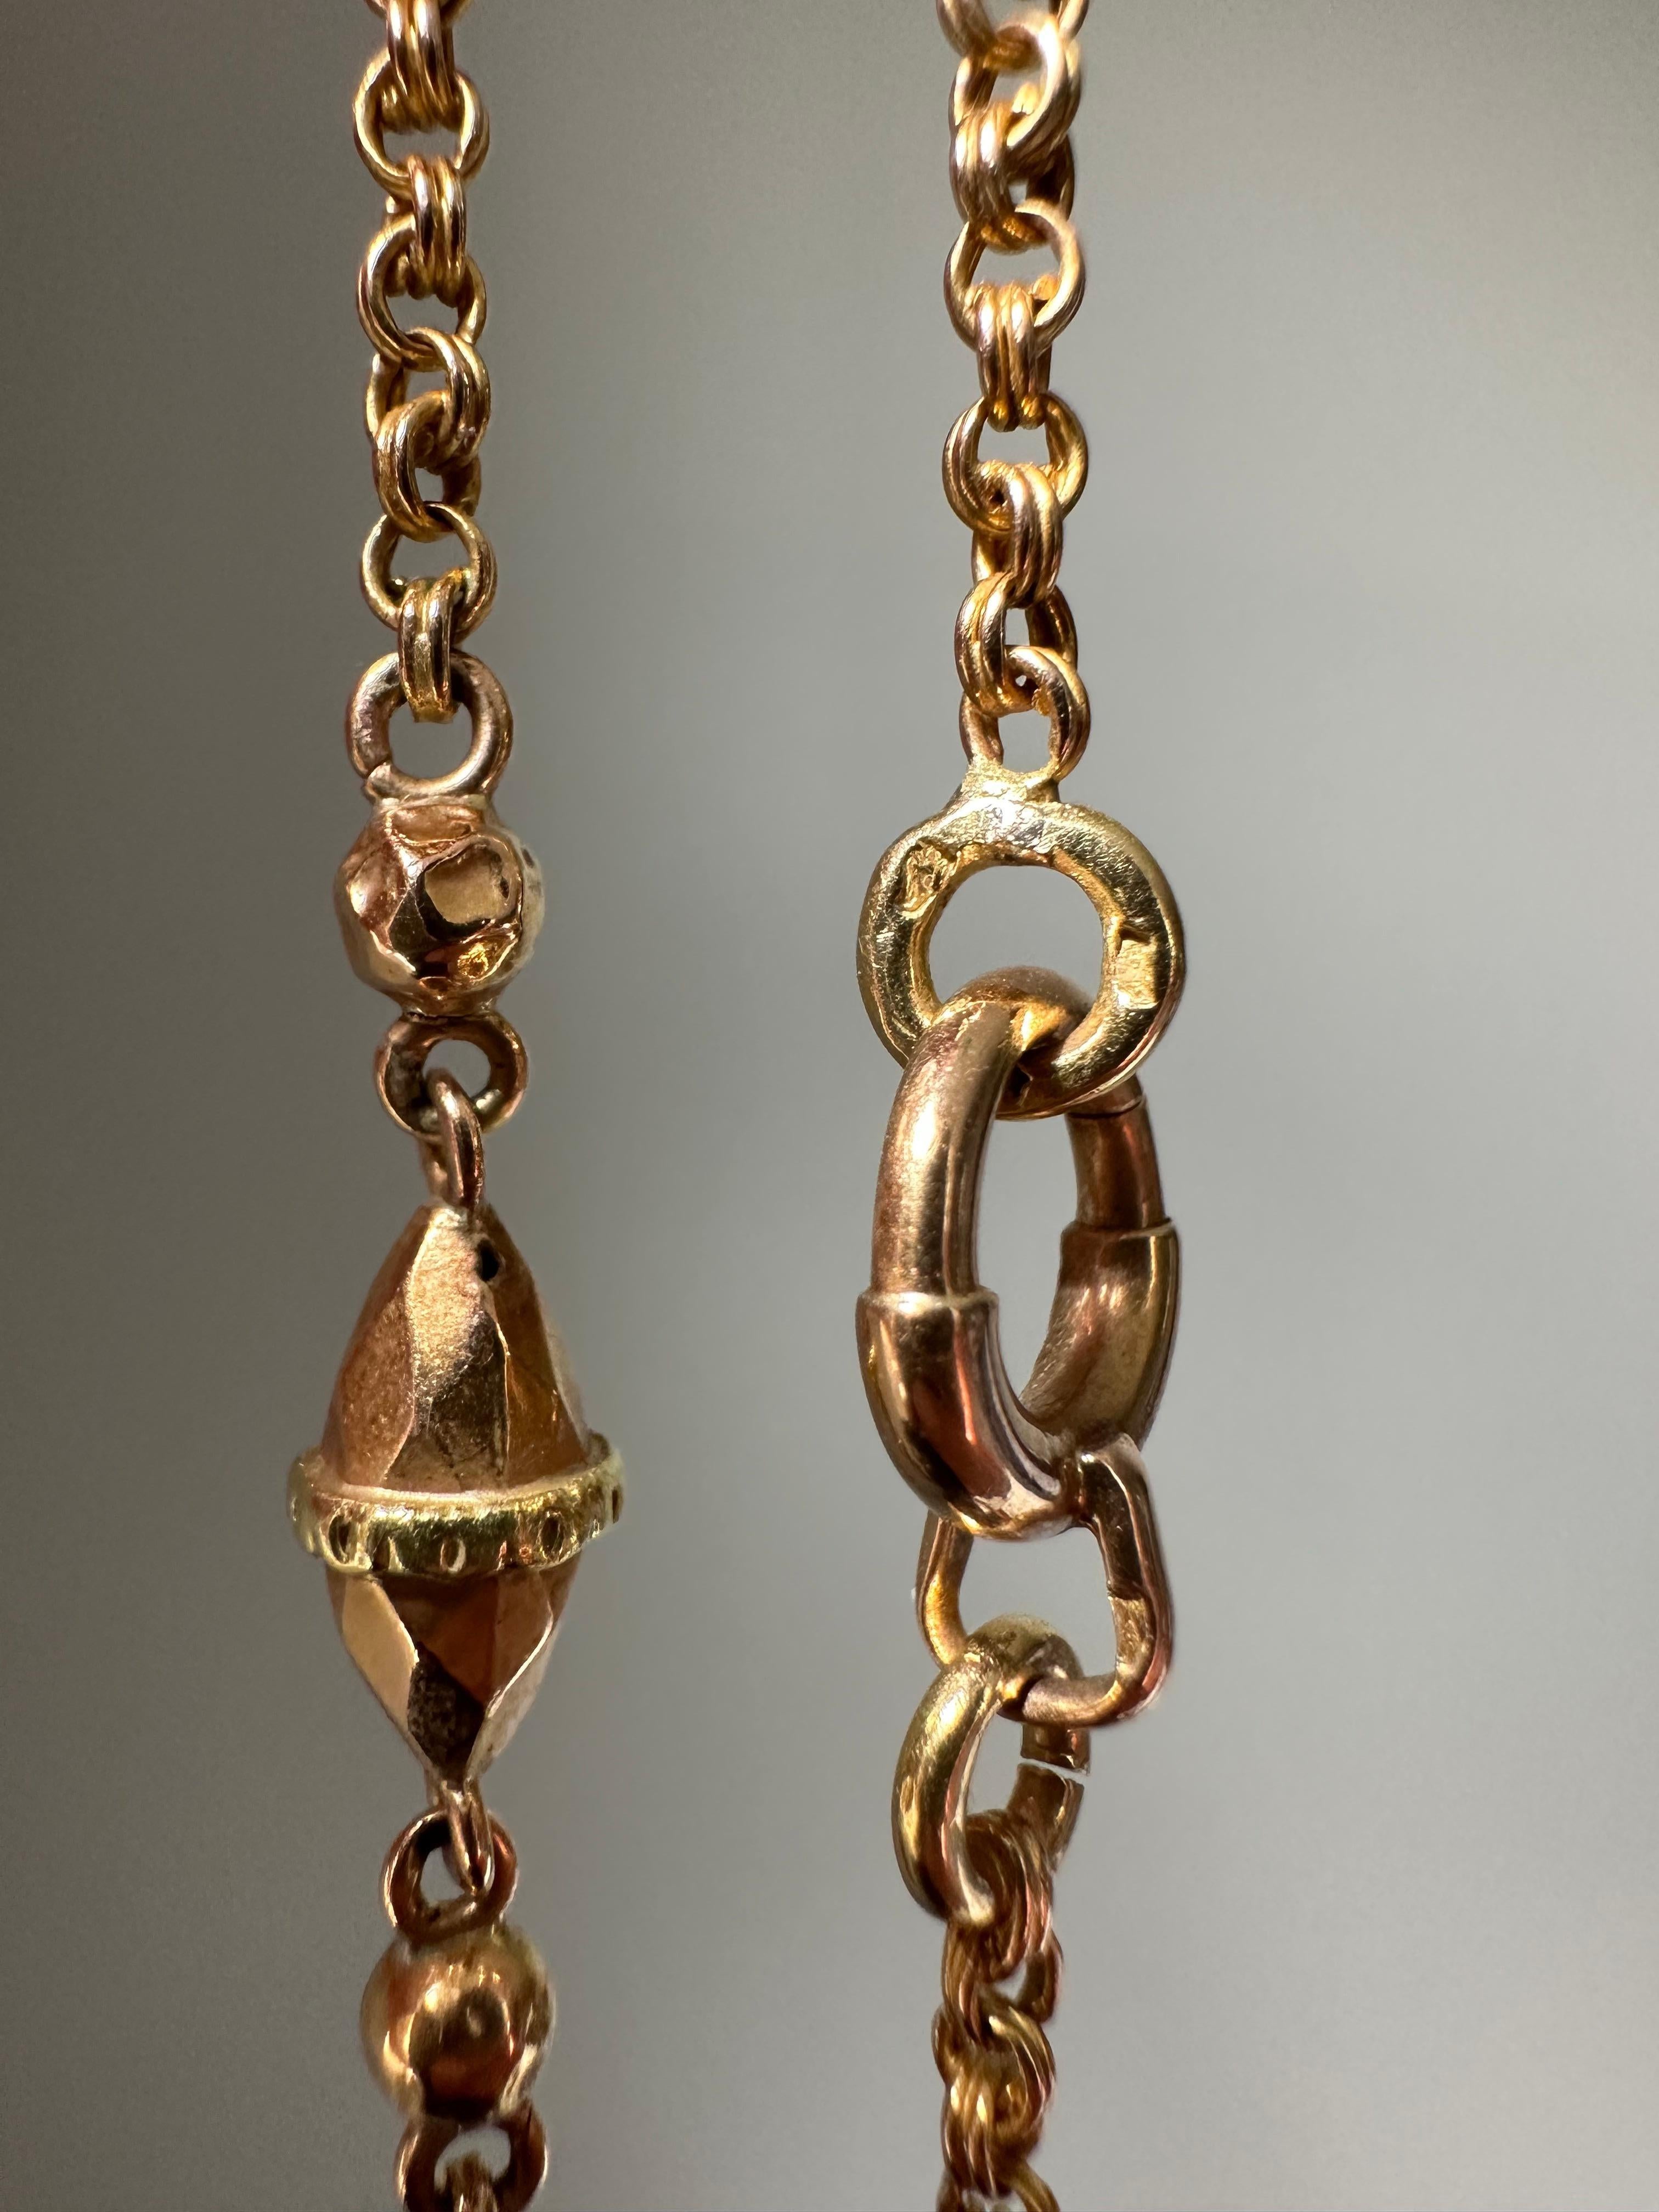 This glorious antique French chain is composed of pairs of delicate interlocking 18K rose gold rings spaced by four faceted bicolor torpedo stations. This will very quickly become a staple in your jewelry wardrobe!

Weight: 13.2 grams

Length: